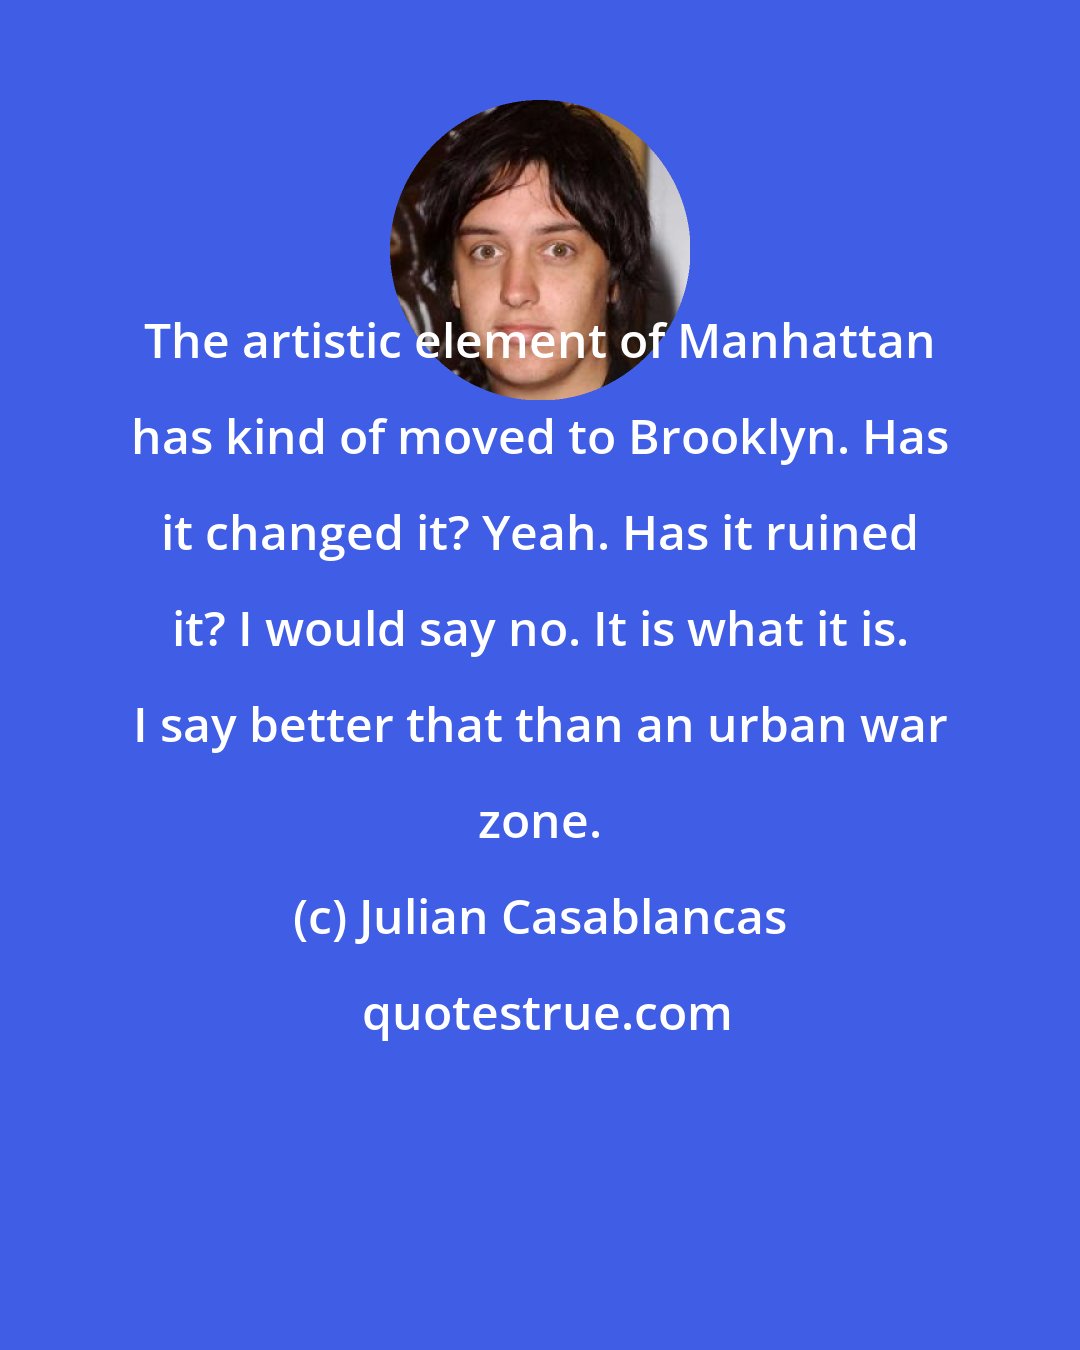 Julian Casablancas: The artistic element of Manhattan has kind of moved to Brooklyn. Has it changed it? Yeah. Has it ruined it? I would say no. It is what it is. I say better that than an urban war zone.